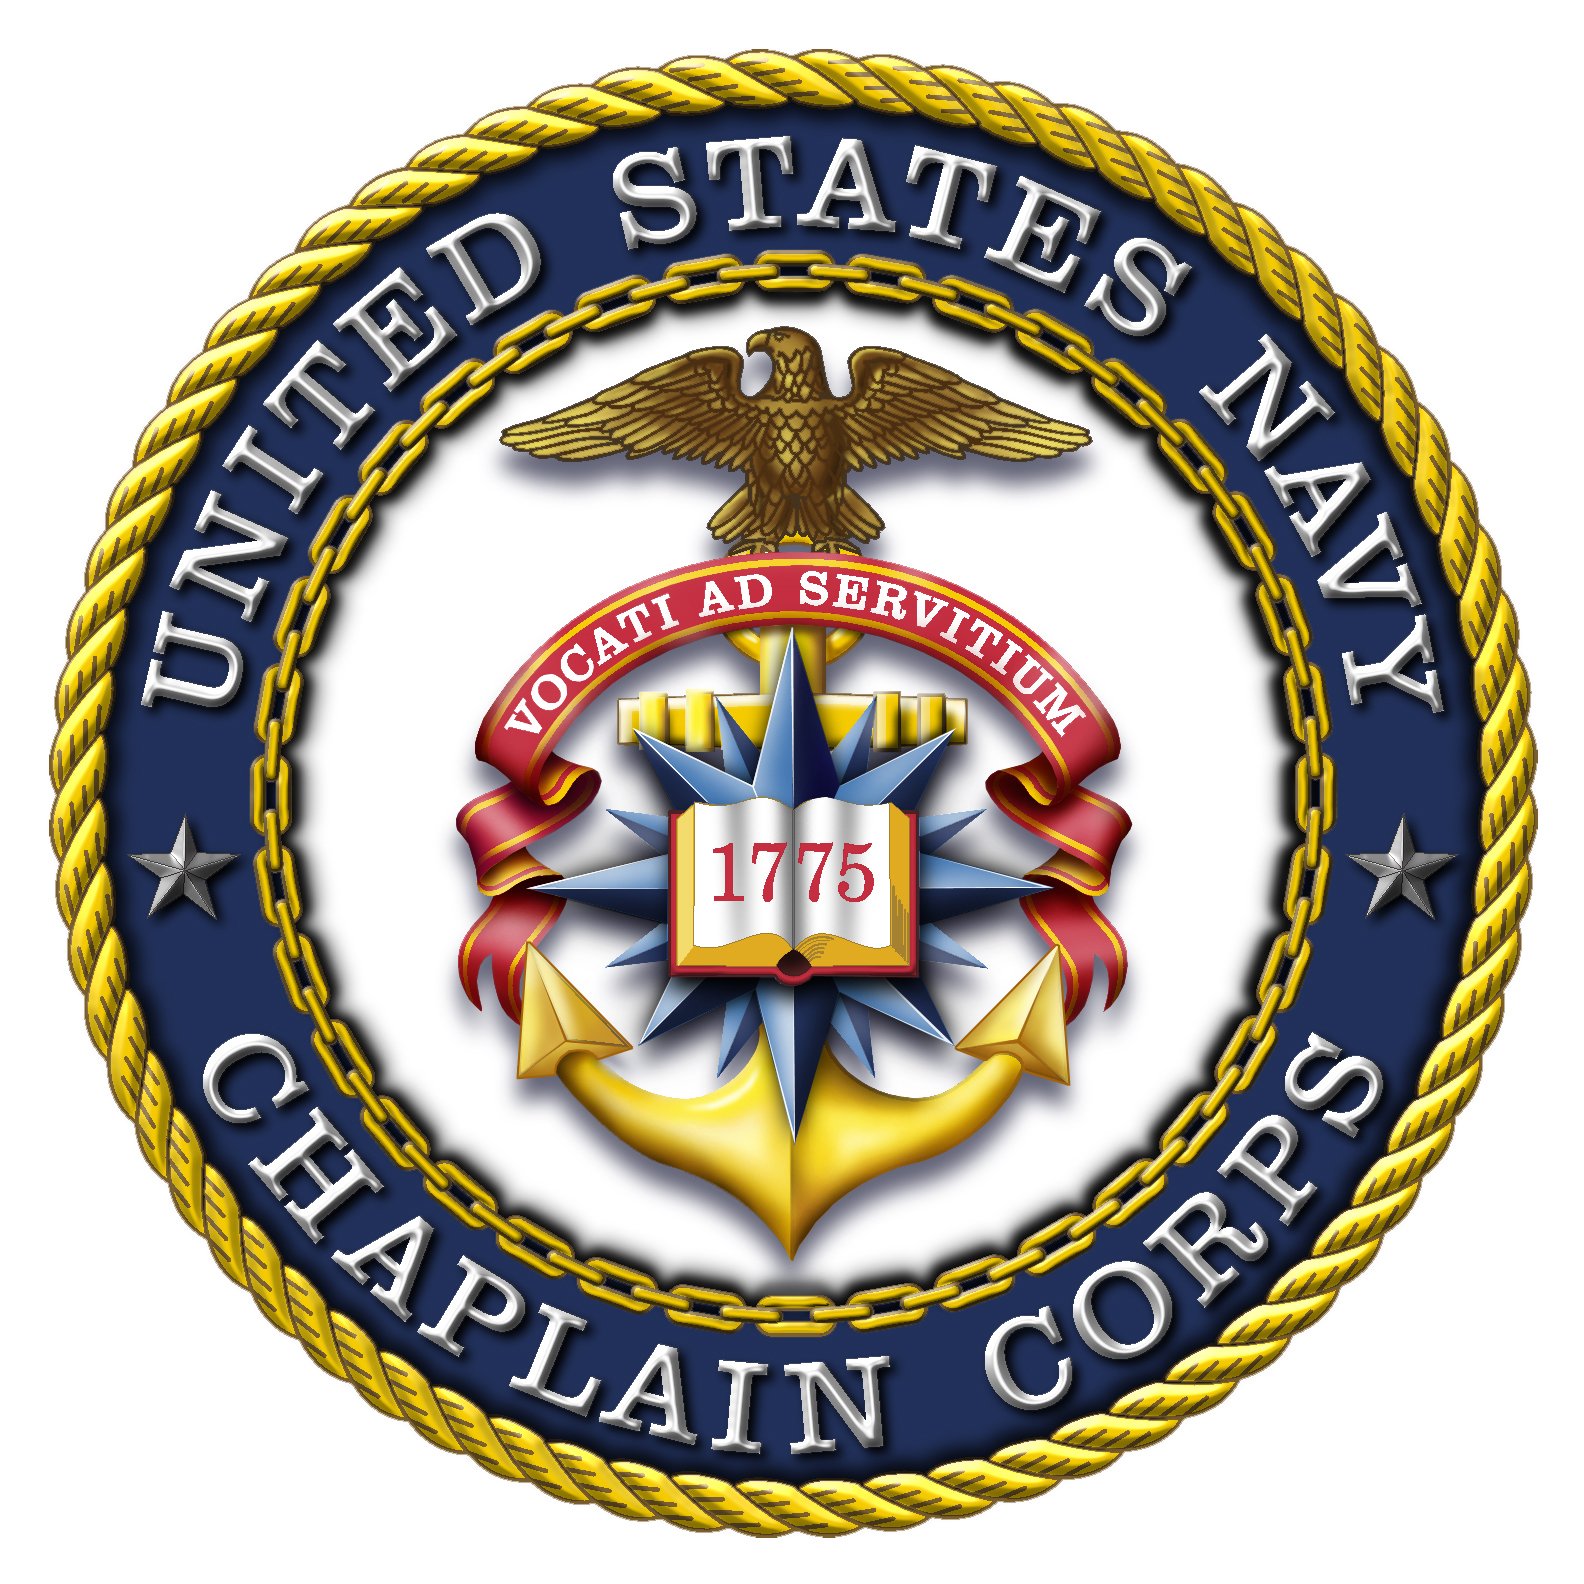 25 Marine Corps Emblem Pictures Free Cliparts That You Can Download To